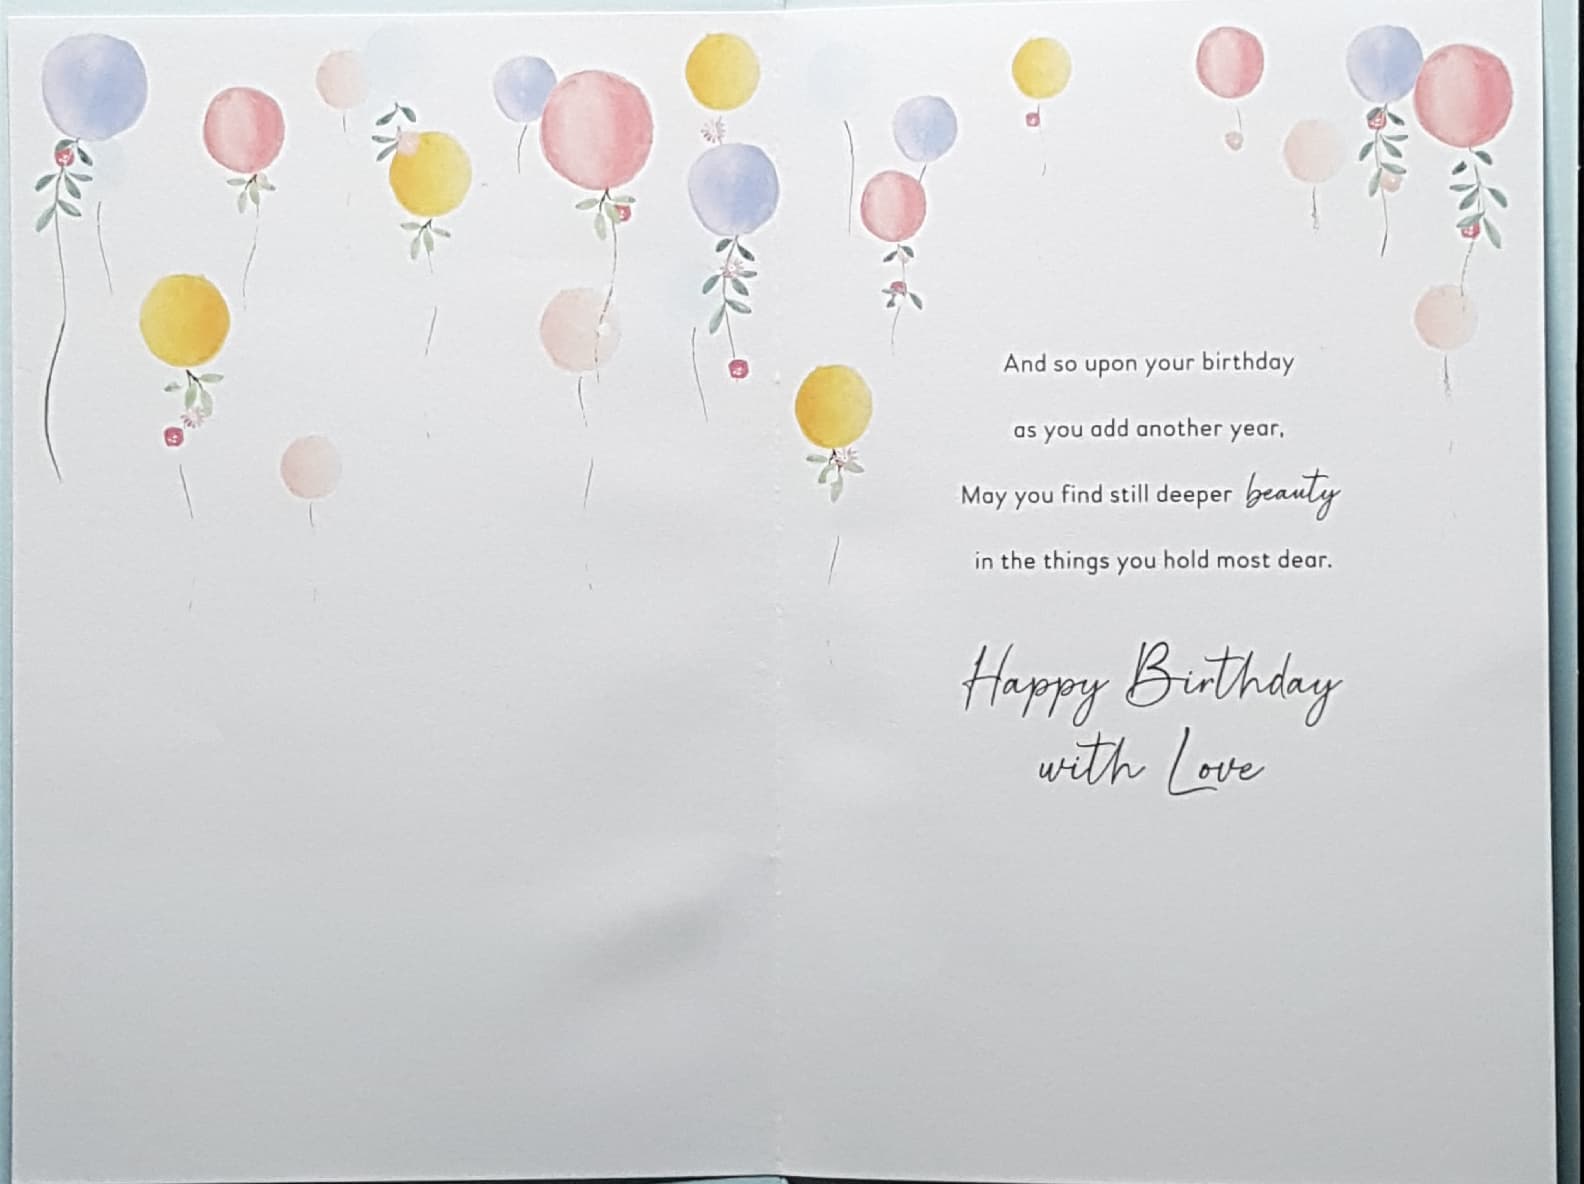 Birthday Card - Just For You / Balloons On A Light Blue Front